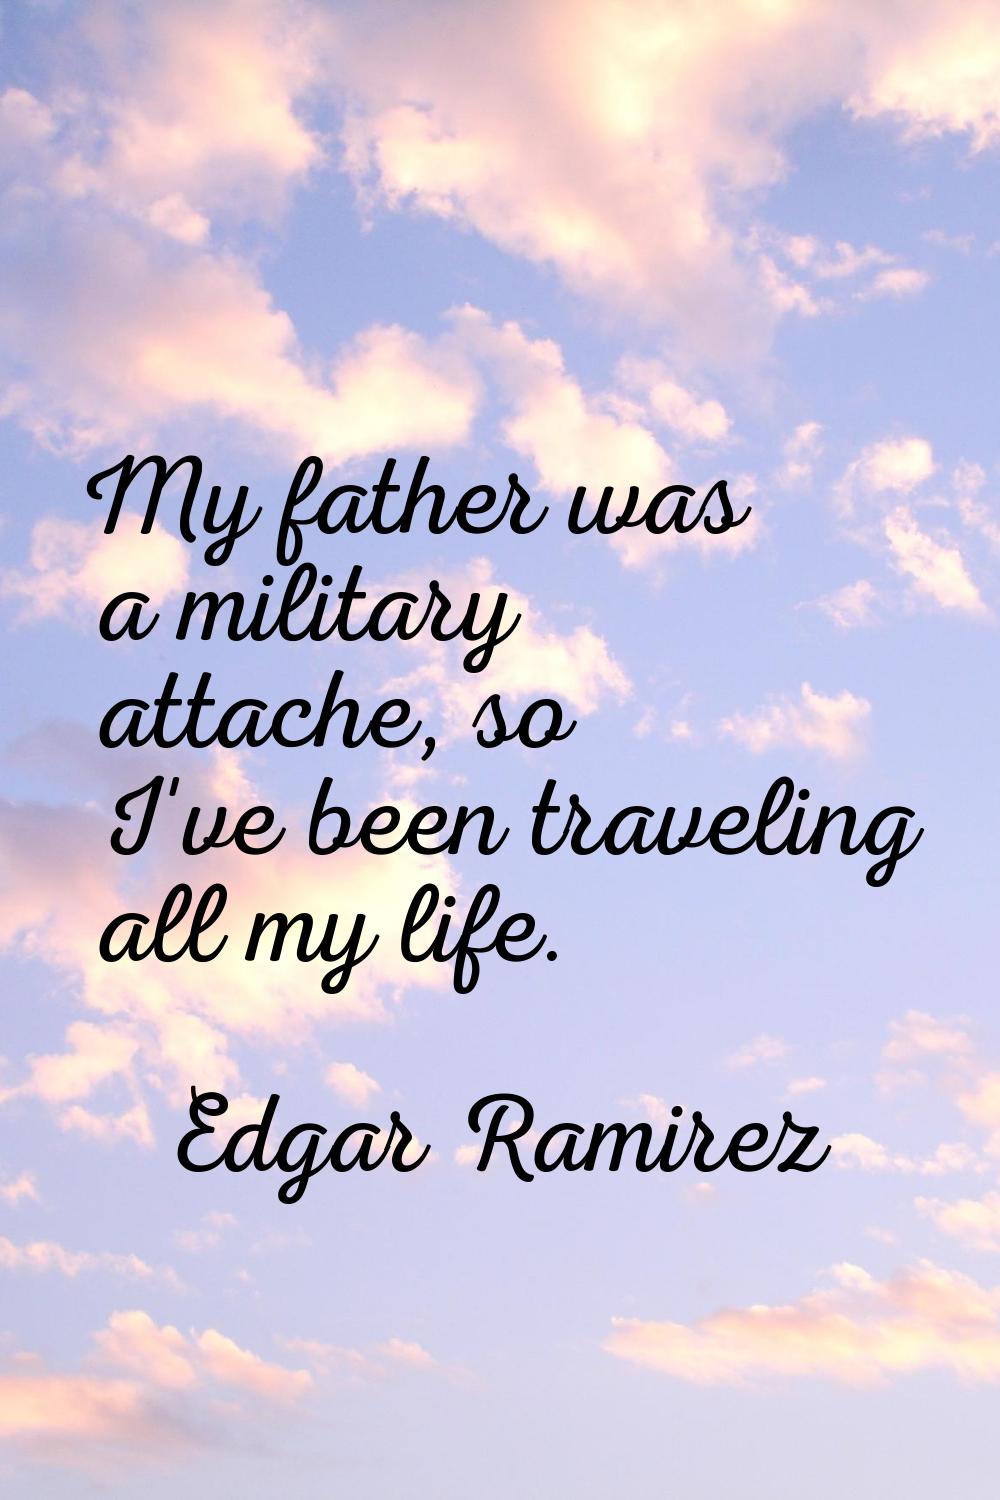 My father was a military attache, so I've been traveling all my life.